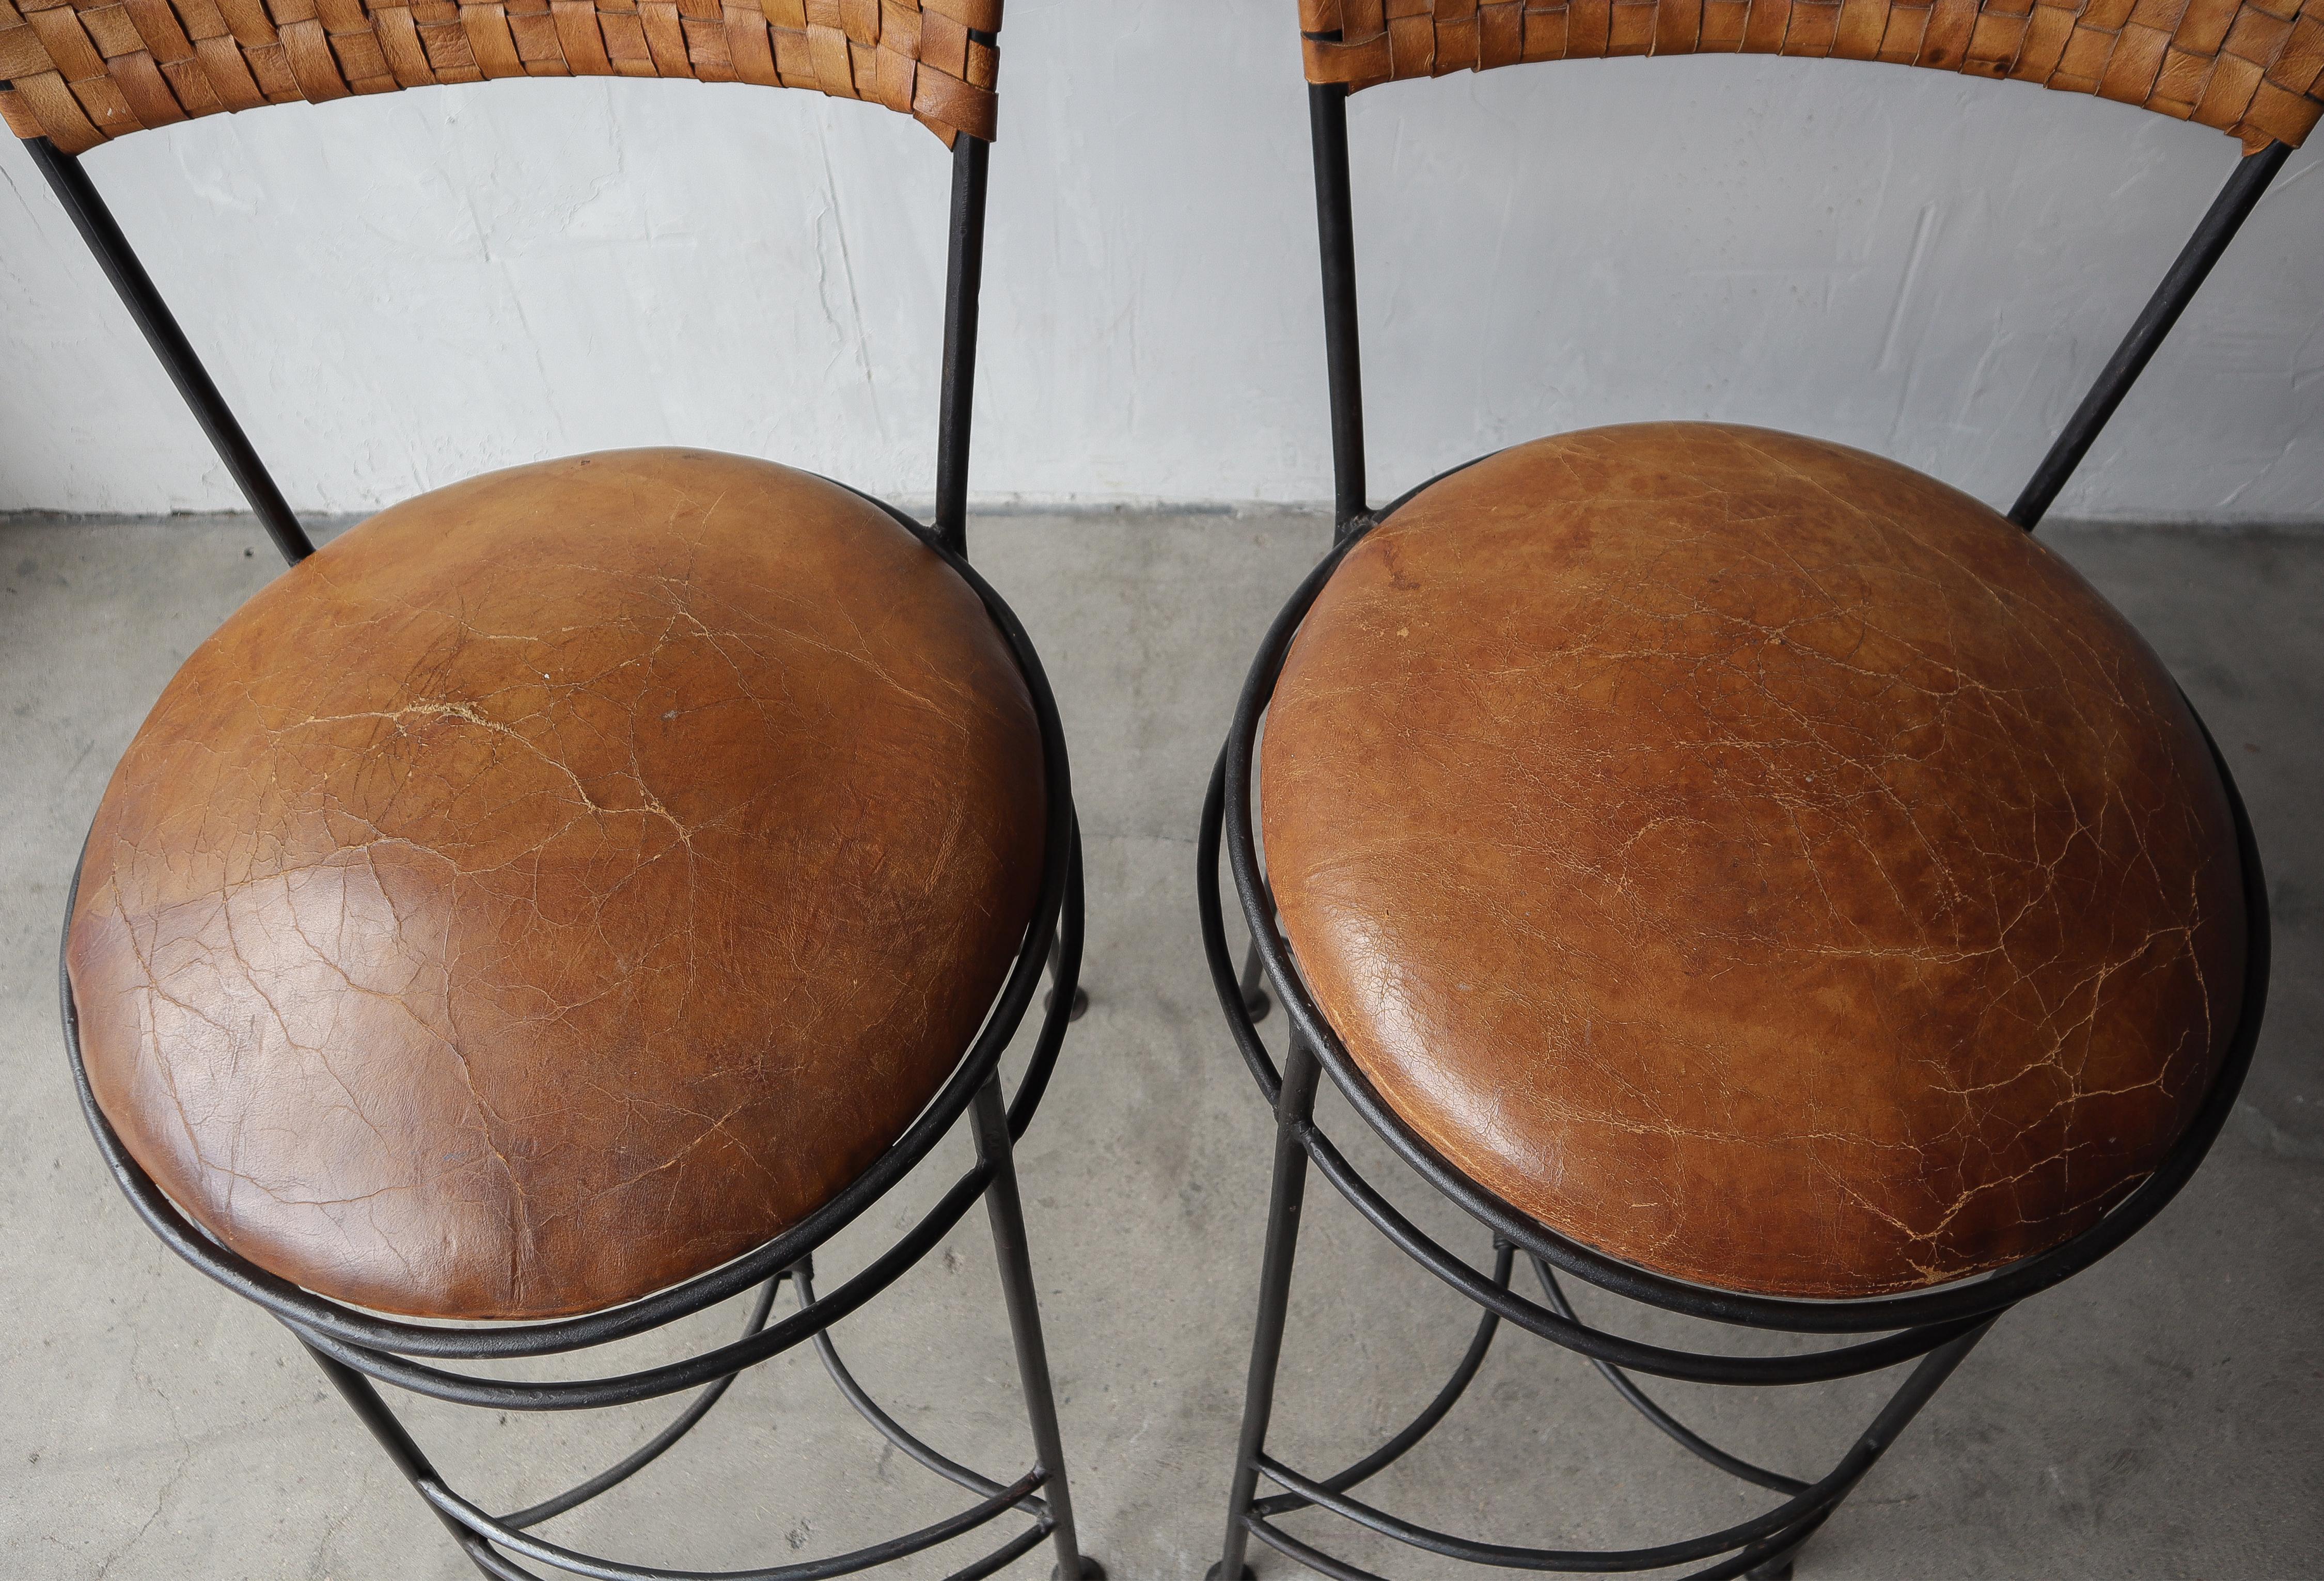 Oversized Vintage Woven Leather and Iron Bar Stools - A Pair For Sale 2